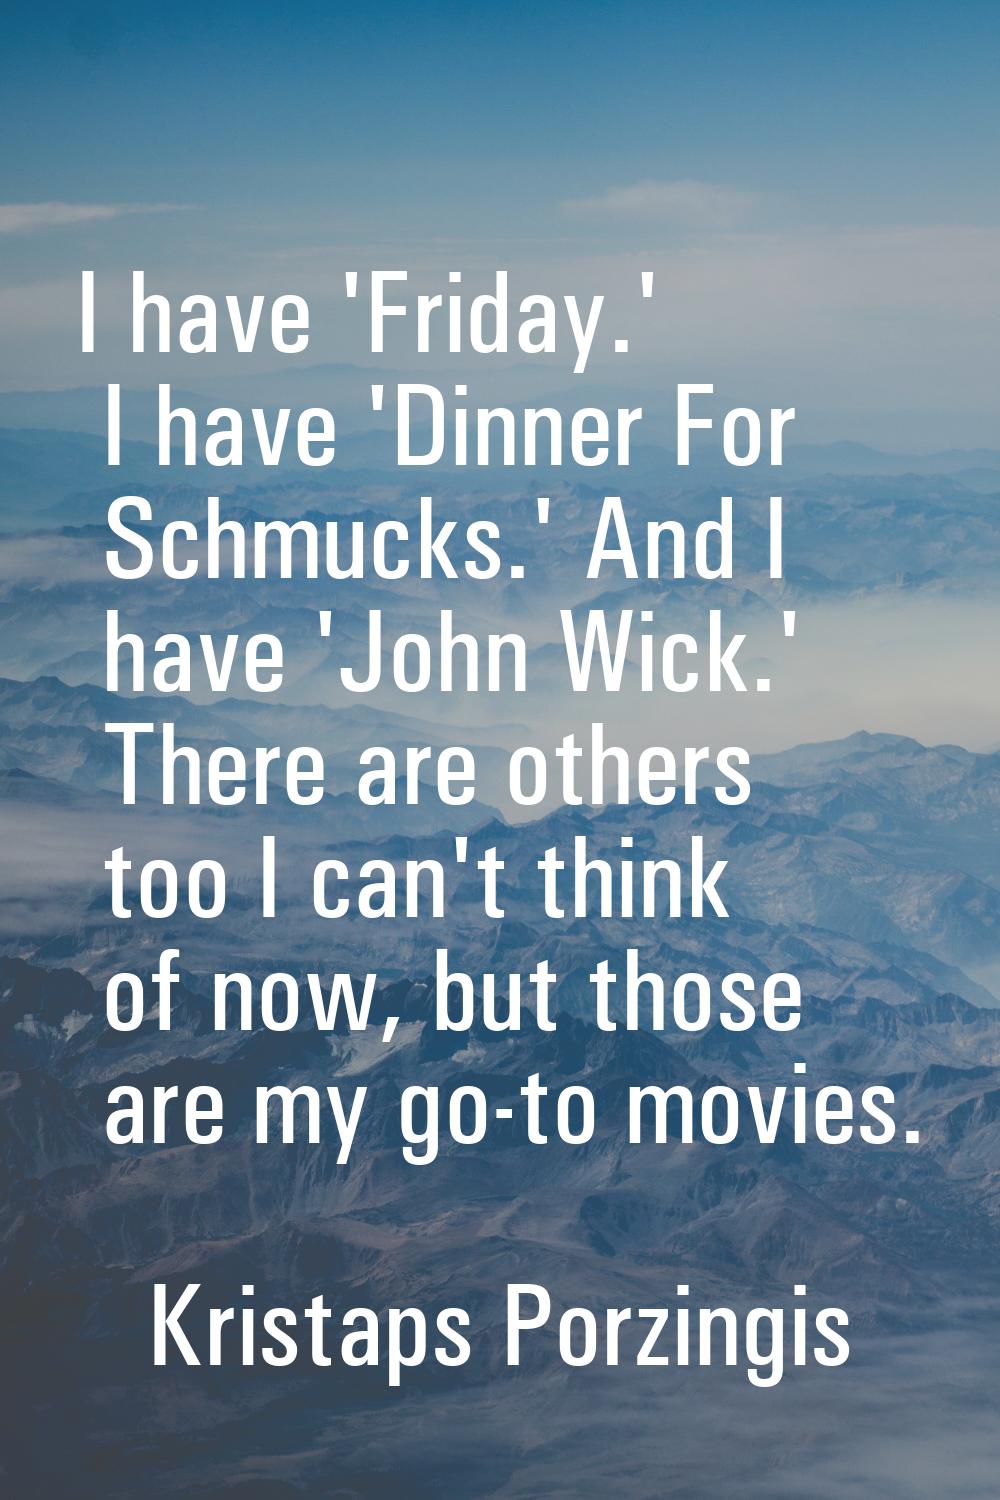 I have 'Friday.' I have 'Dinner For Schmucks.' And I have 'John Wick.' There are others too I can't